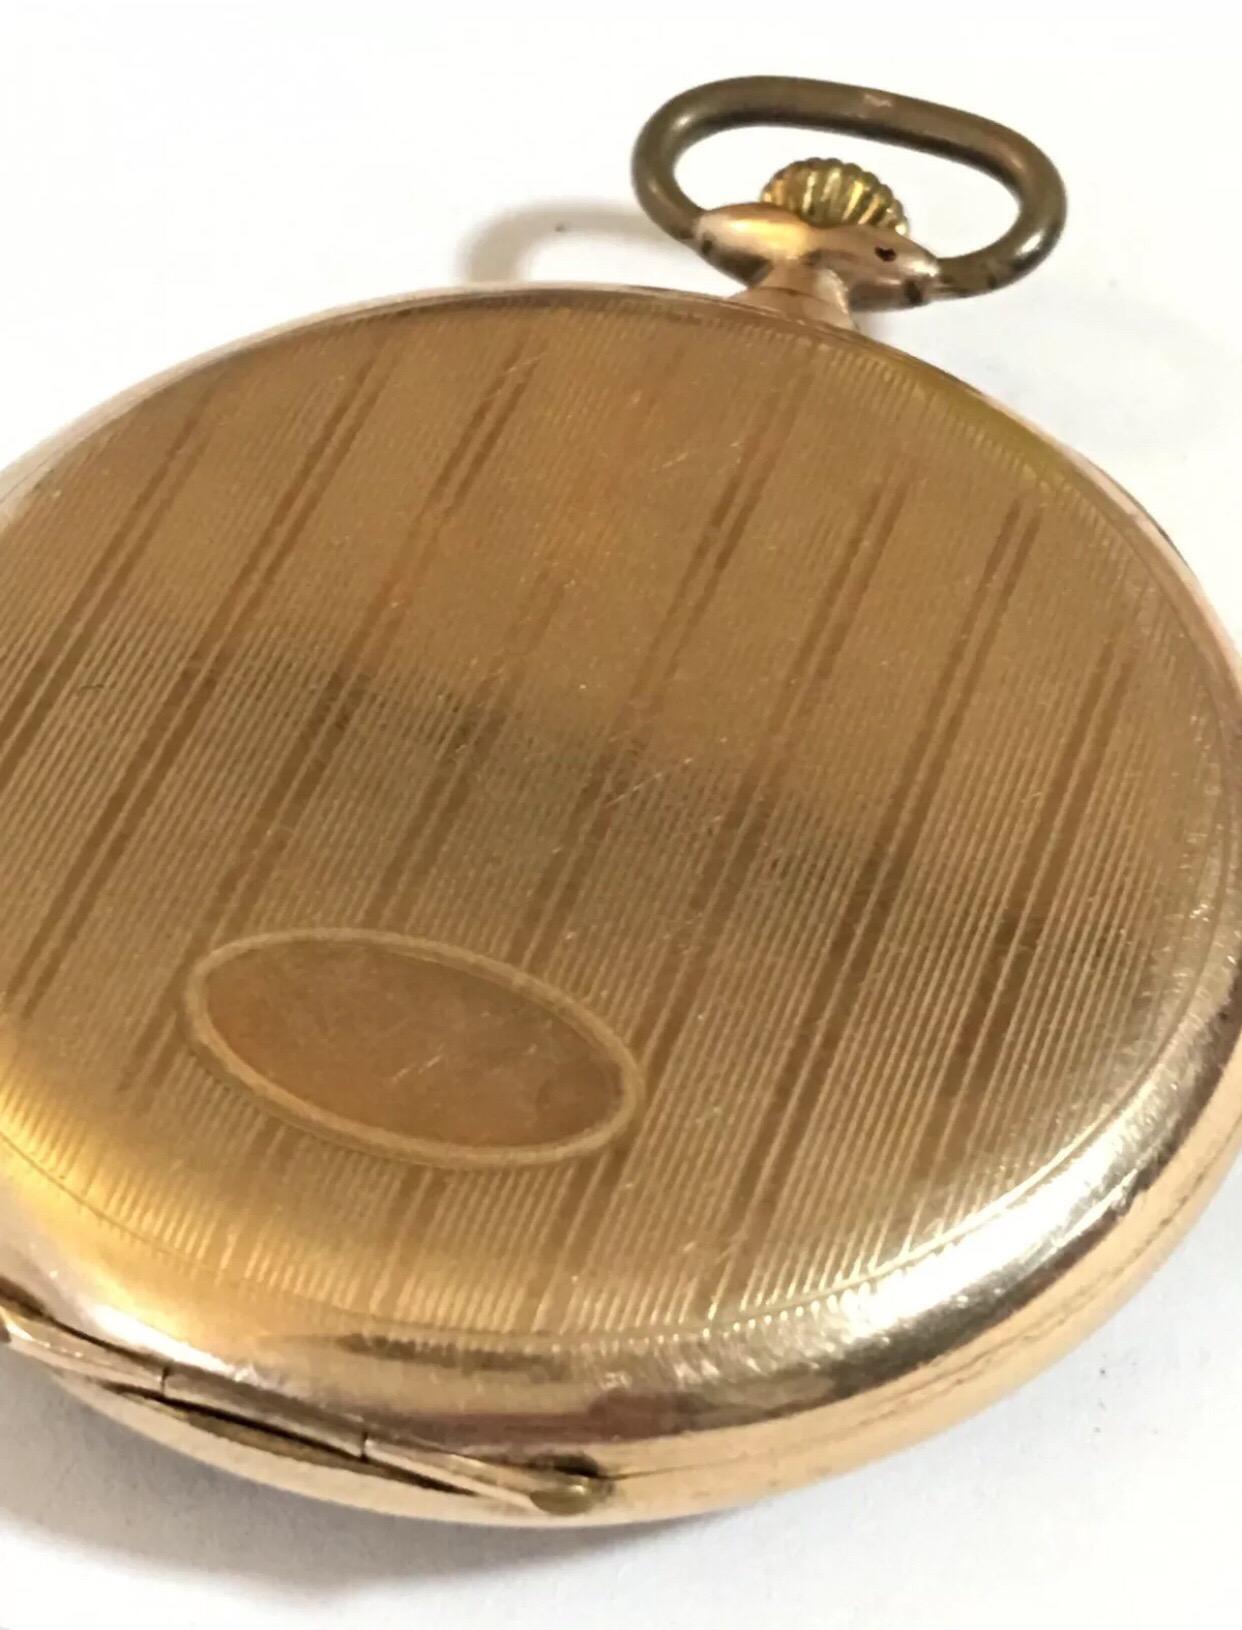 Stunning Gold-Plated Cyma Dress Pocket Watch For Sale 3